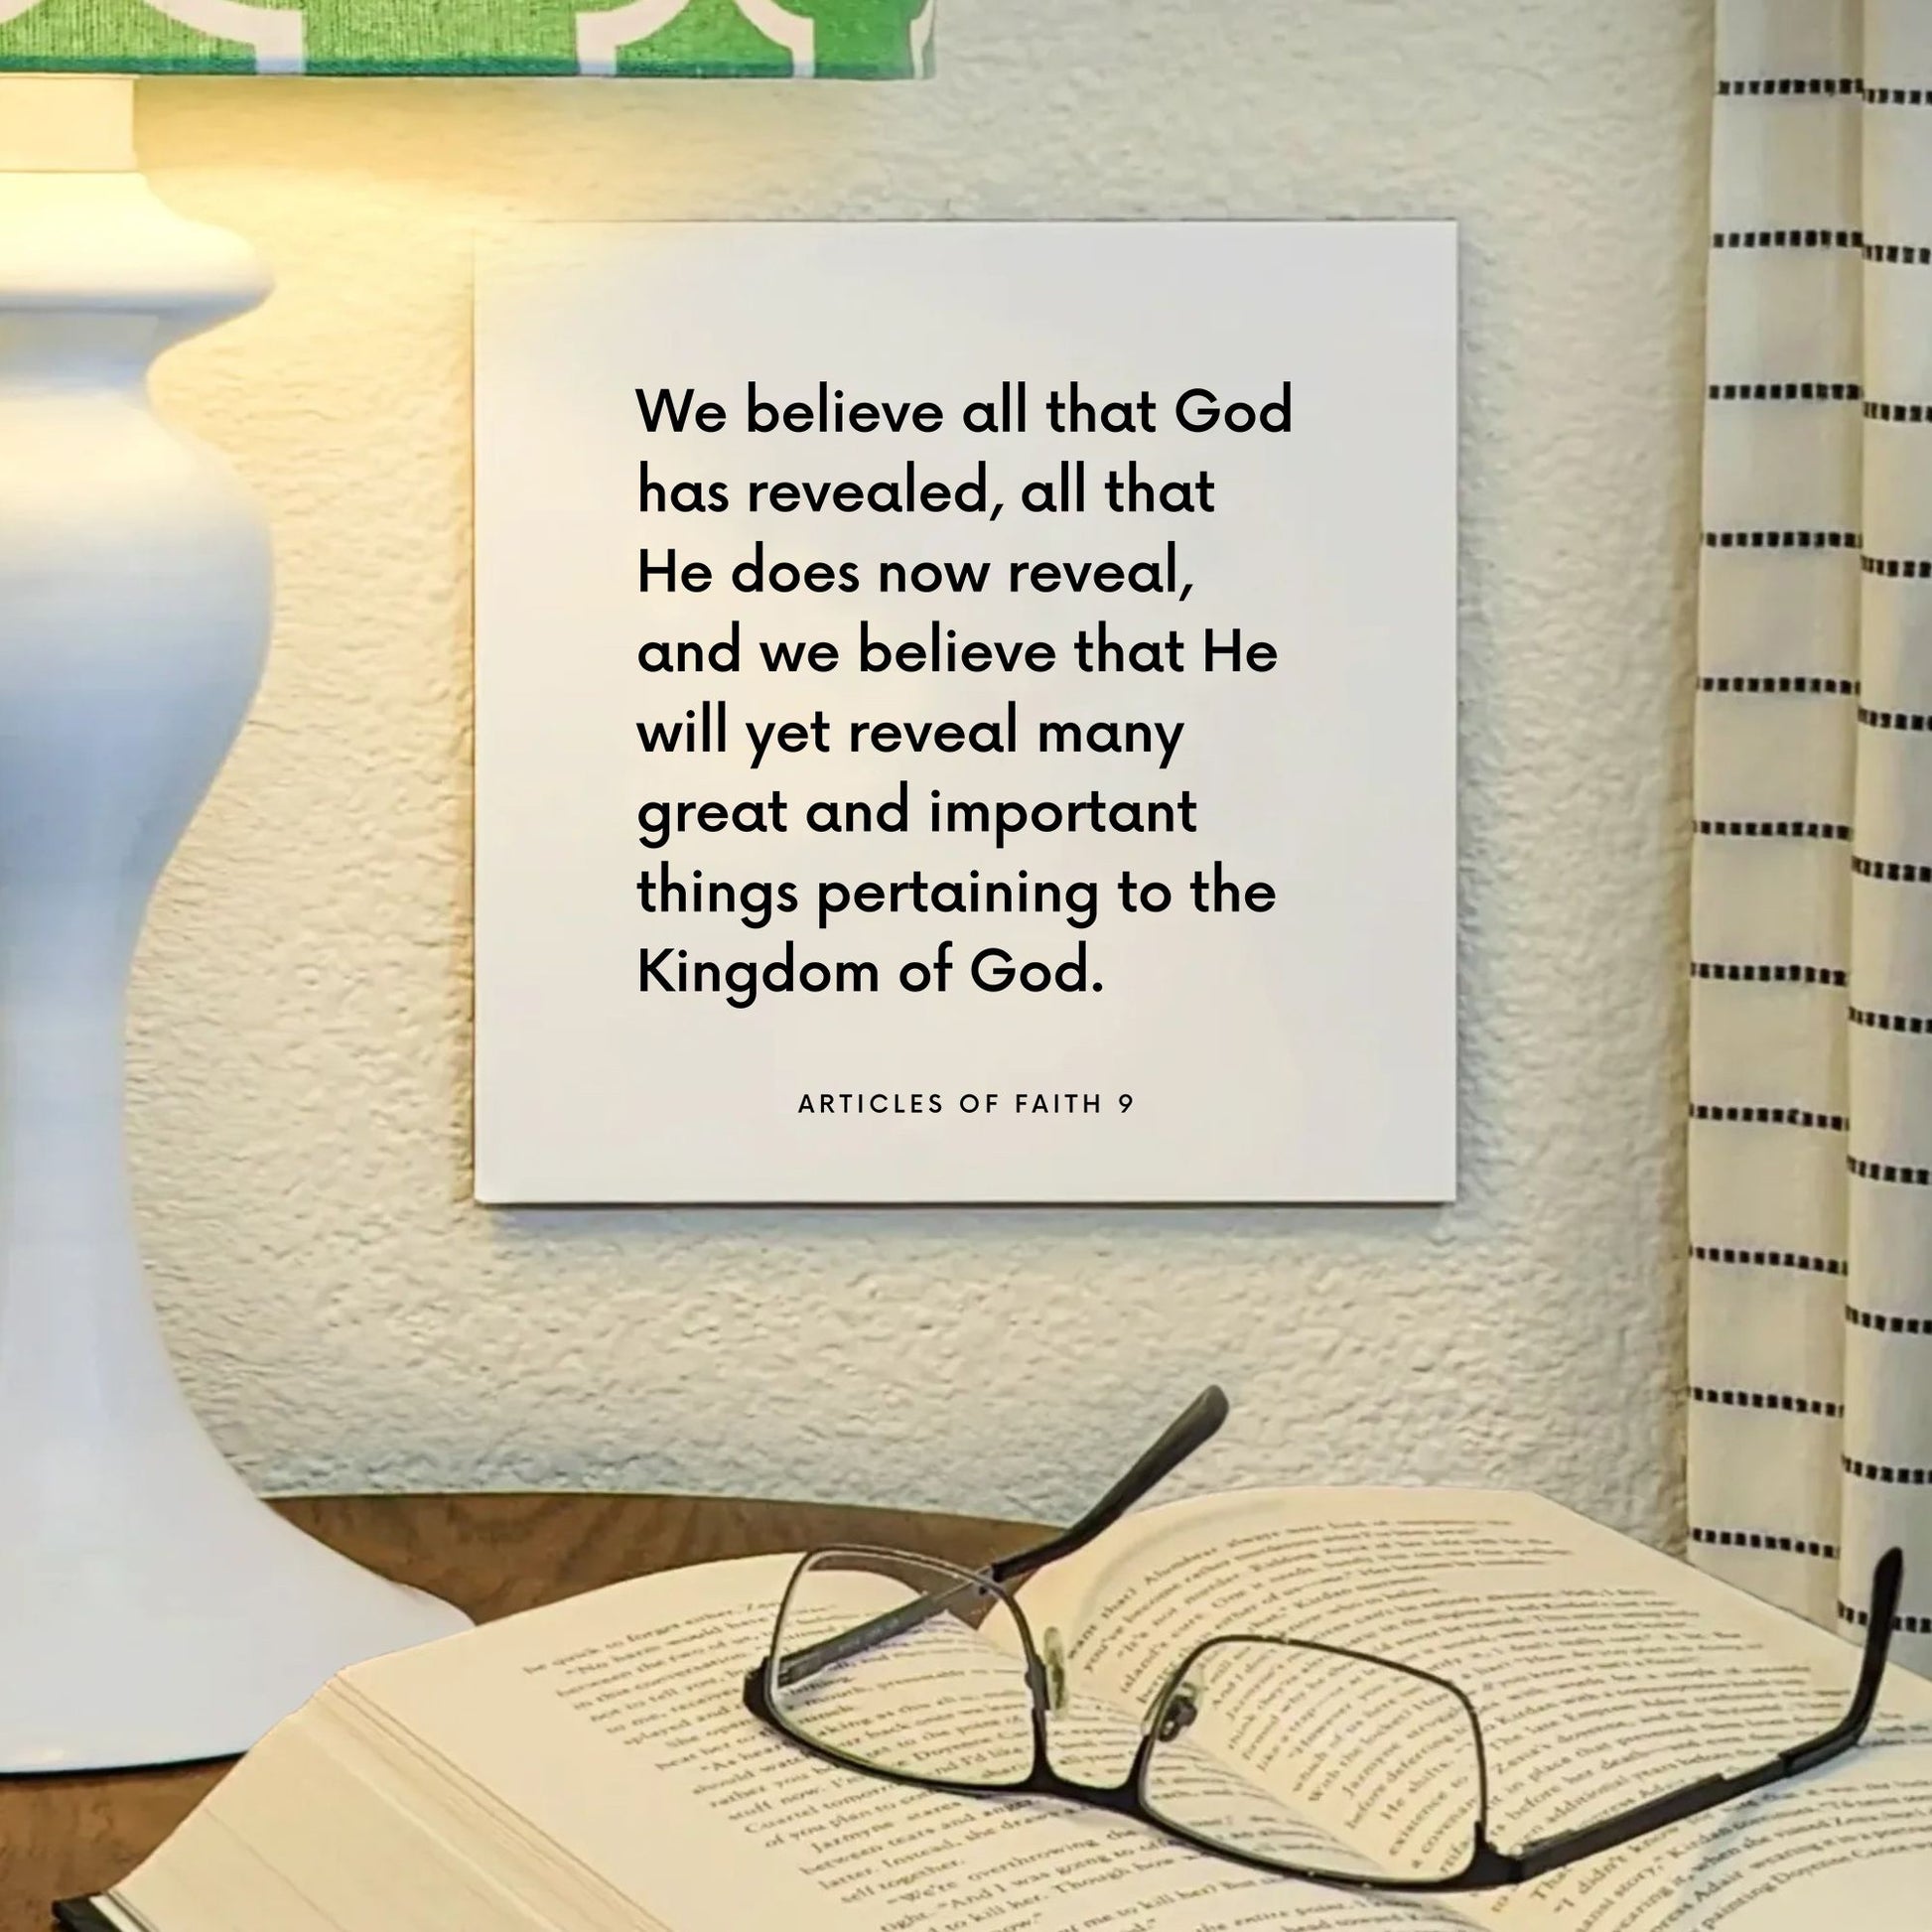 Lamp mouting of the scripture tile for Articles of Faith 9 - "We believe all that God has revealed"